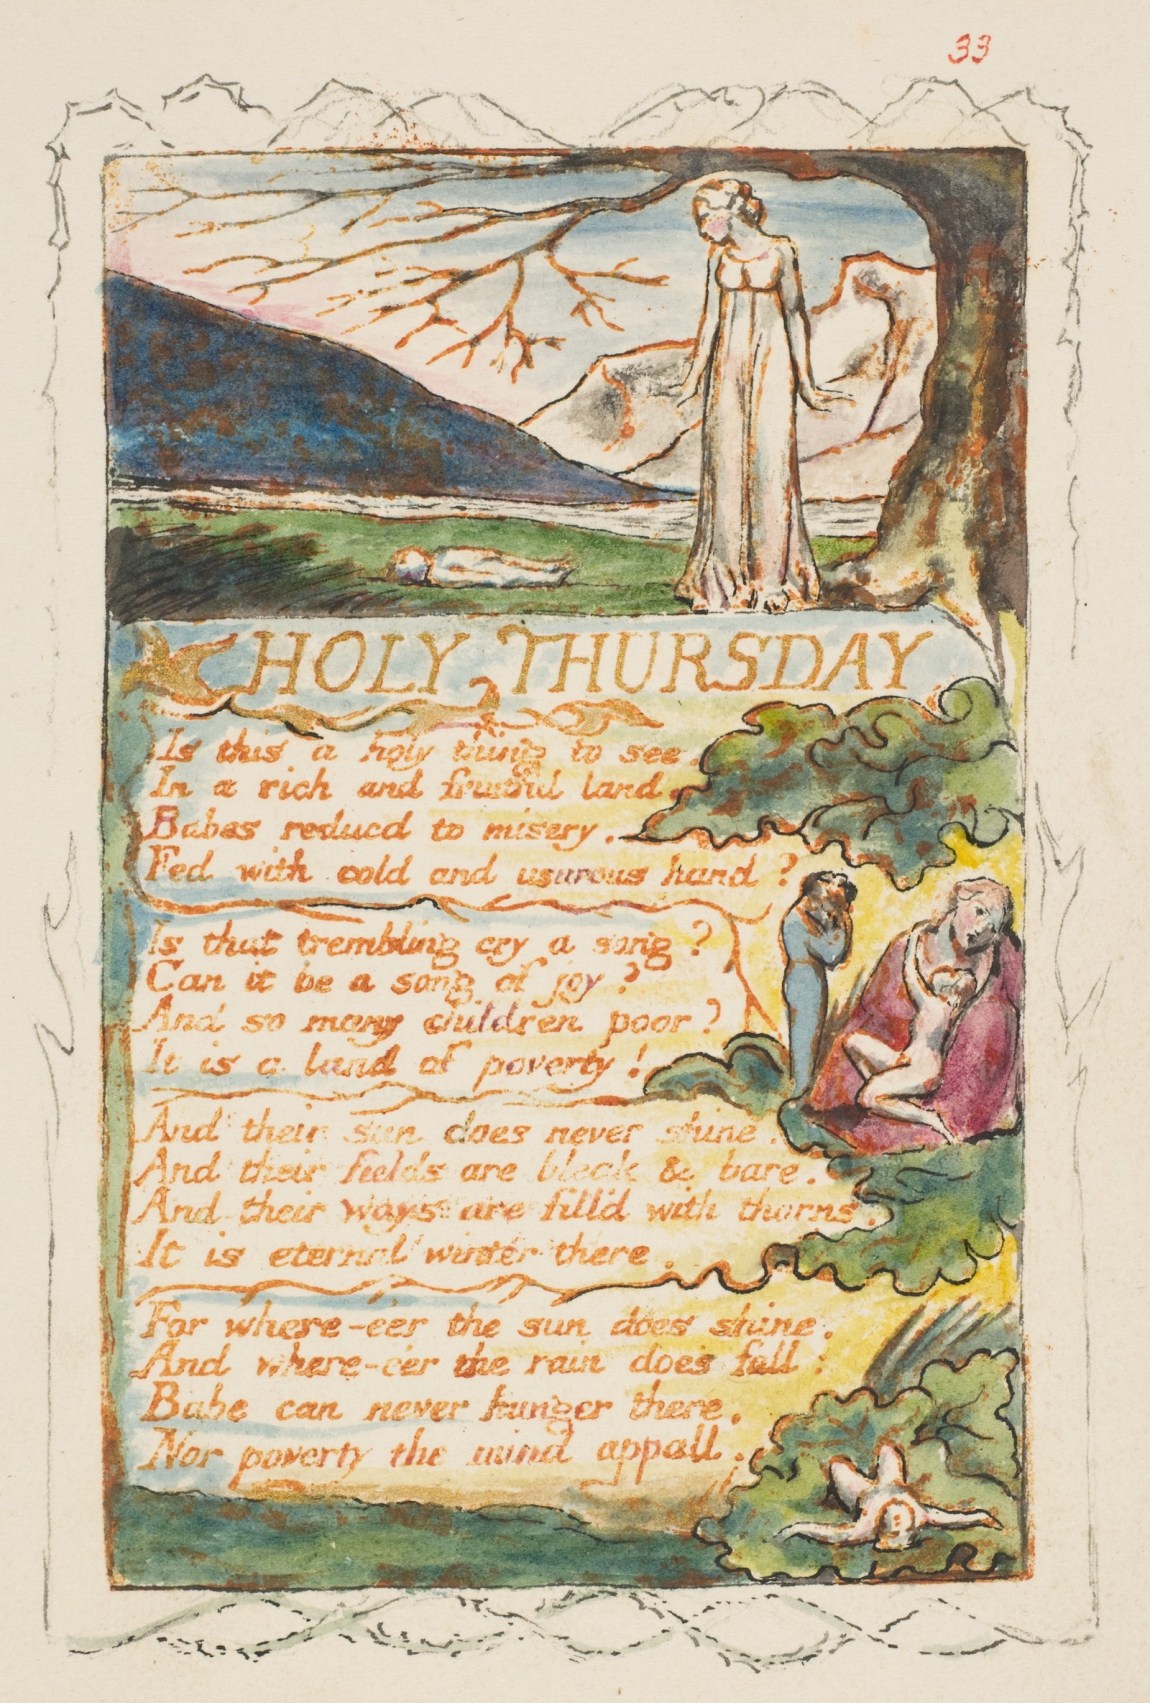 William Blake's watercolor illustrated text of his poem Holy Thursday: Is this a holy thing to see, In a rich and fruitful land, Babes reduced to misery, Fed with cold and usurous hand? Is that trembling cry a song? Can it be a song of joy? And so many children poor? It is a land of poverty! And their sun does never shine. And their fields are bleak and bare. And their ways are fill'd with thorns. It is eternal winter there. For wherever the sun does shine, And wherever the rain does fall: Babe can never hunger there, Nor poverty the mind appall.